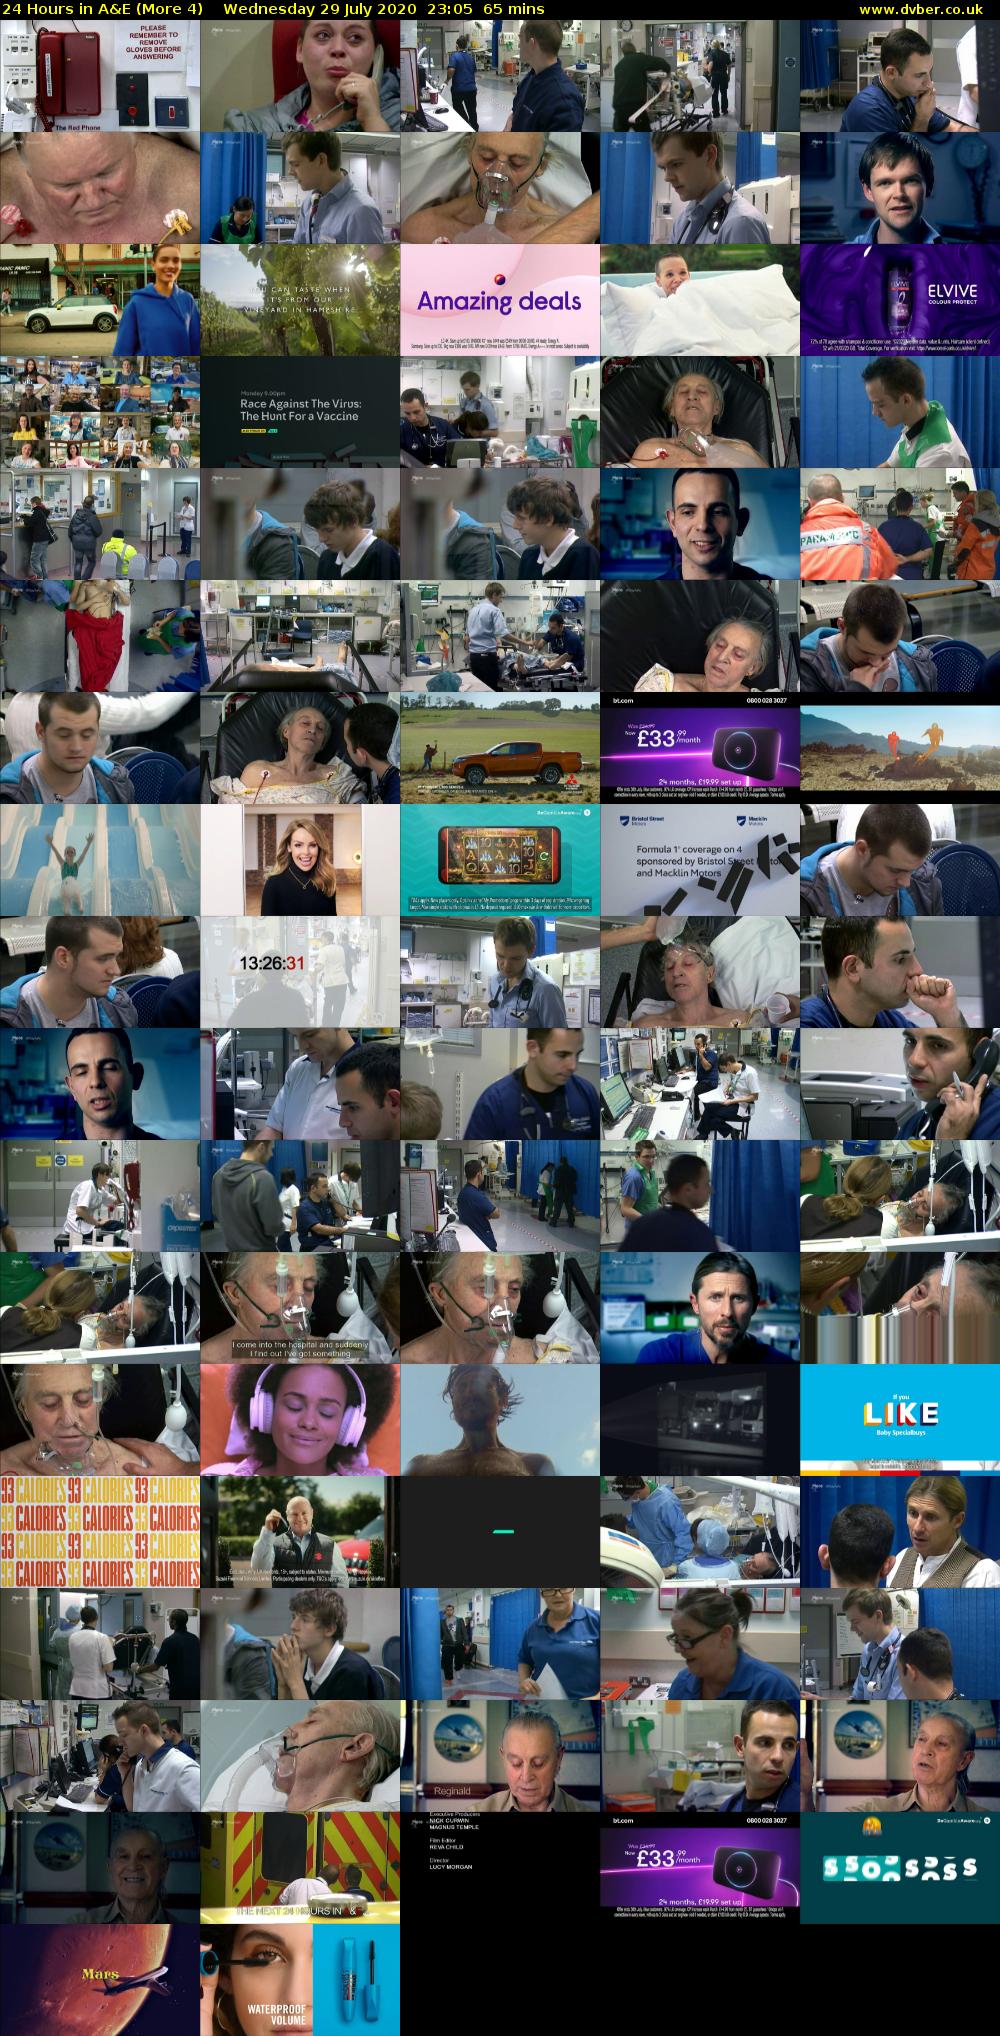 24 Hours in A&E (More 4) Wednesday 29 July 2020 23:05 - 00:10